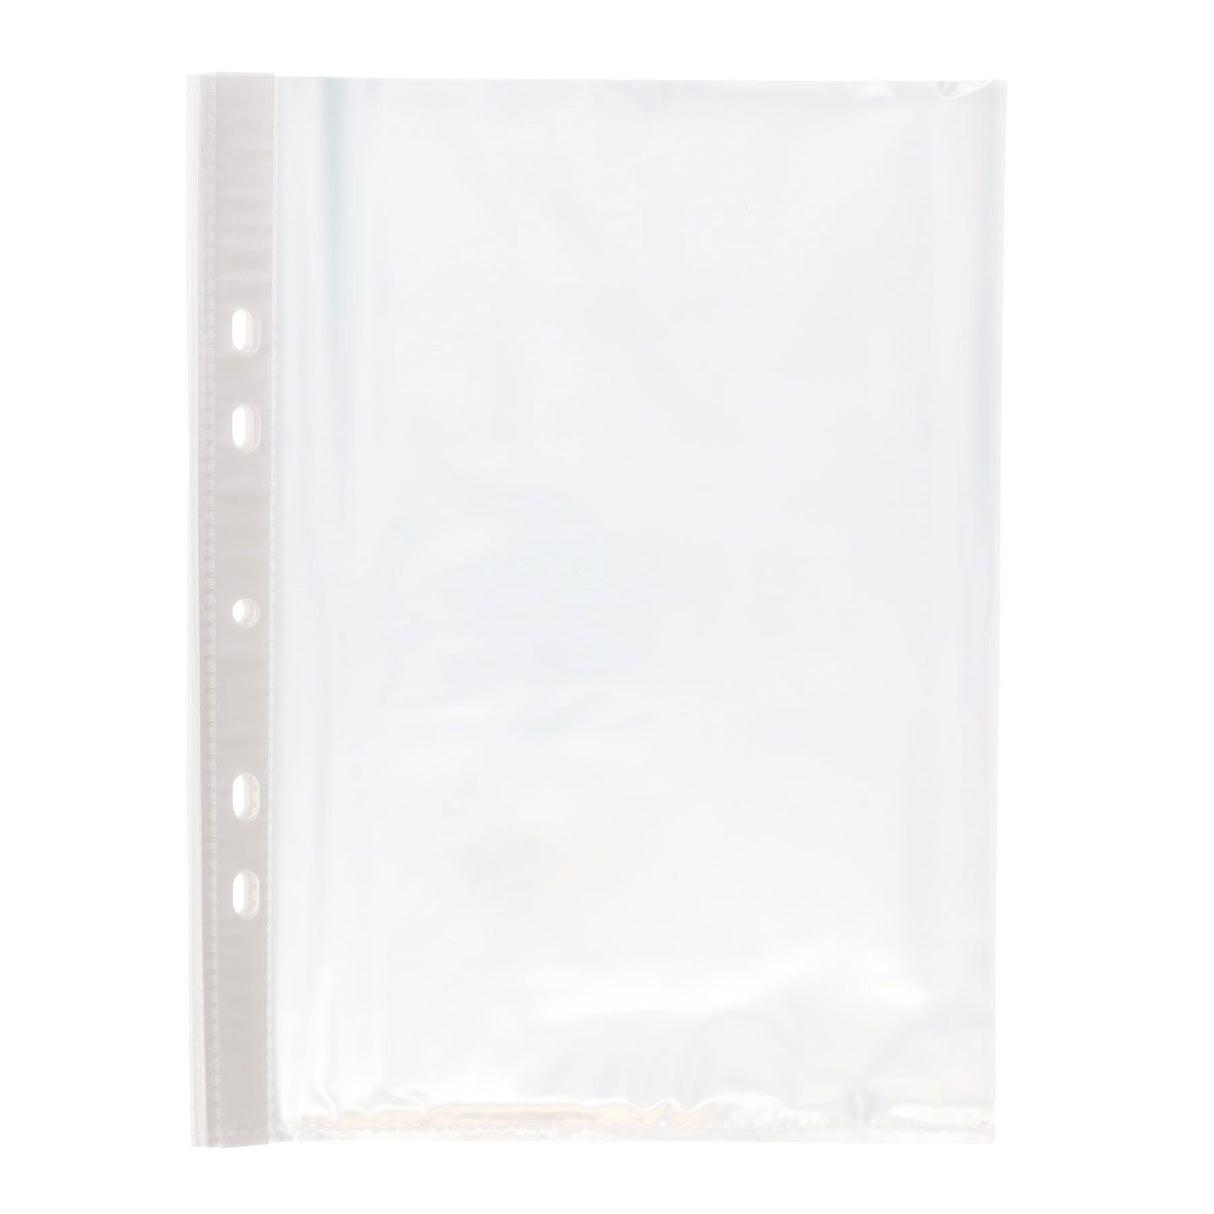 Premier Office A5 Protective Punched Pockets - Pack of 25 | Stationery Shop UK